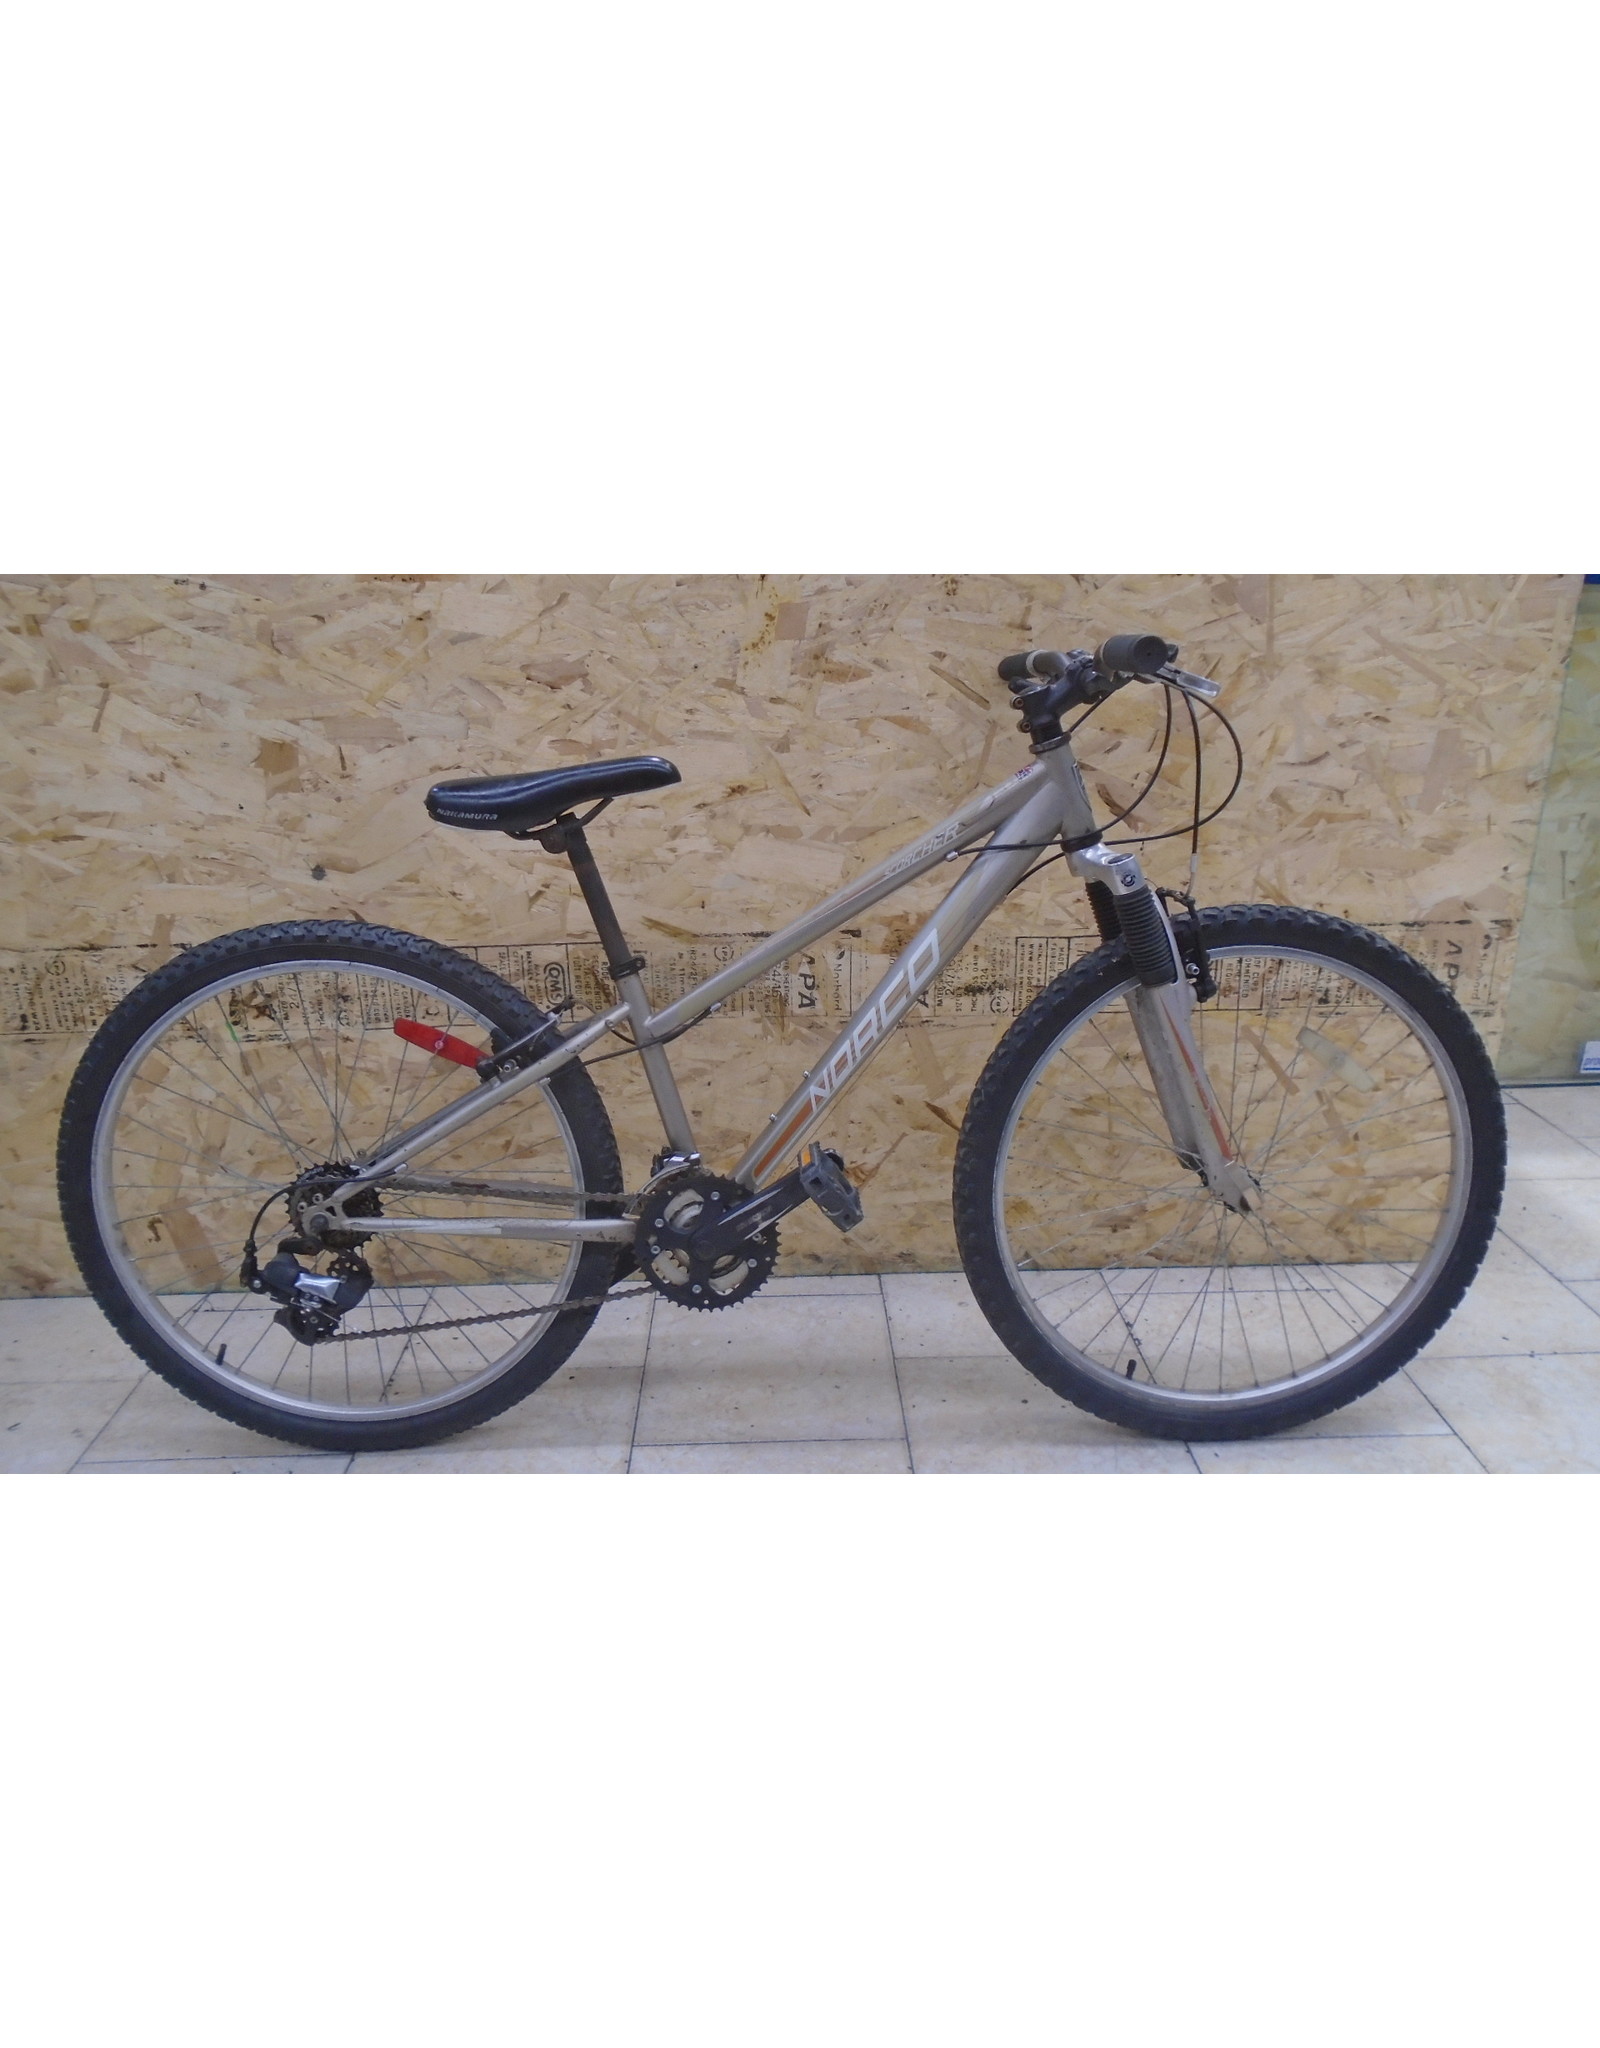 used norco mountain bikes for sale